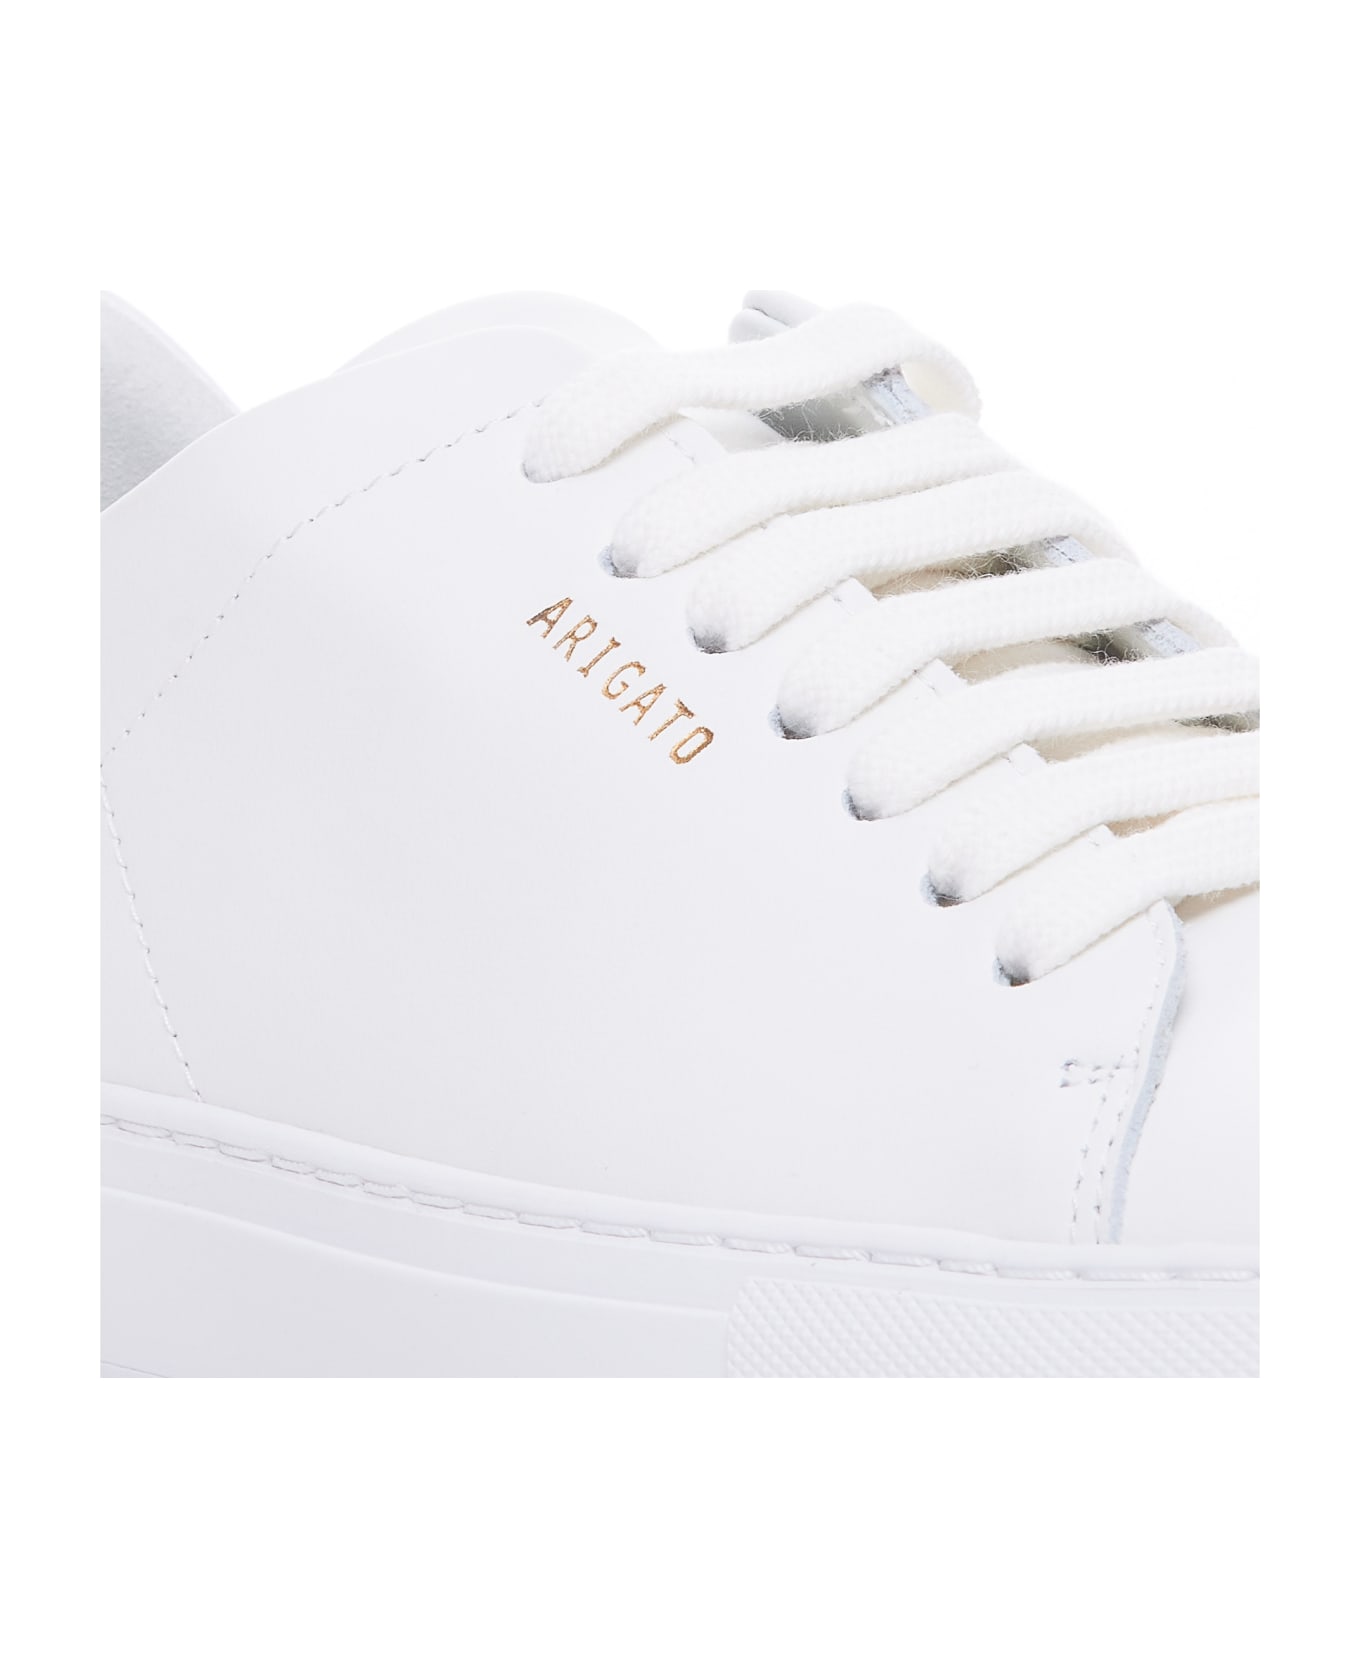 Axel Arigato Clean 90 Sneakers - White スニーカー